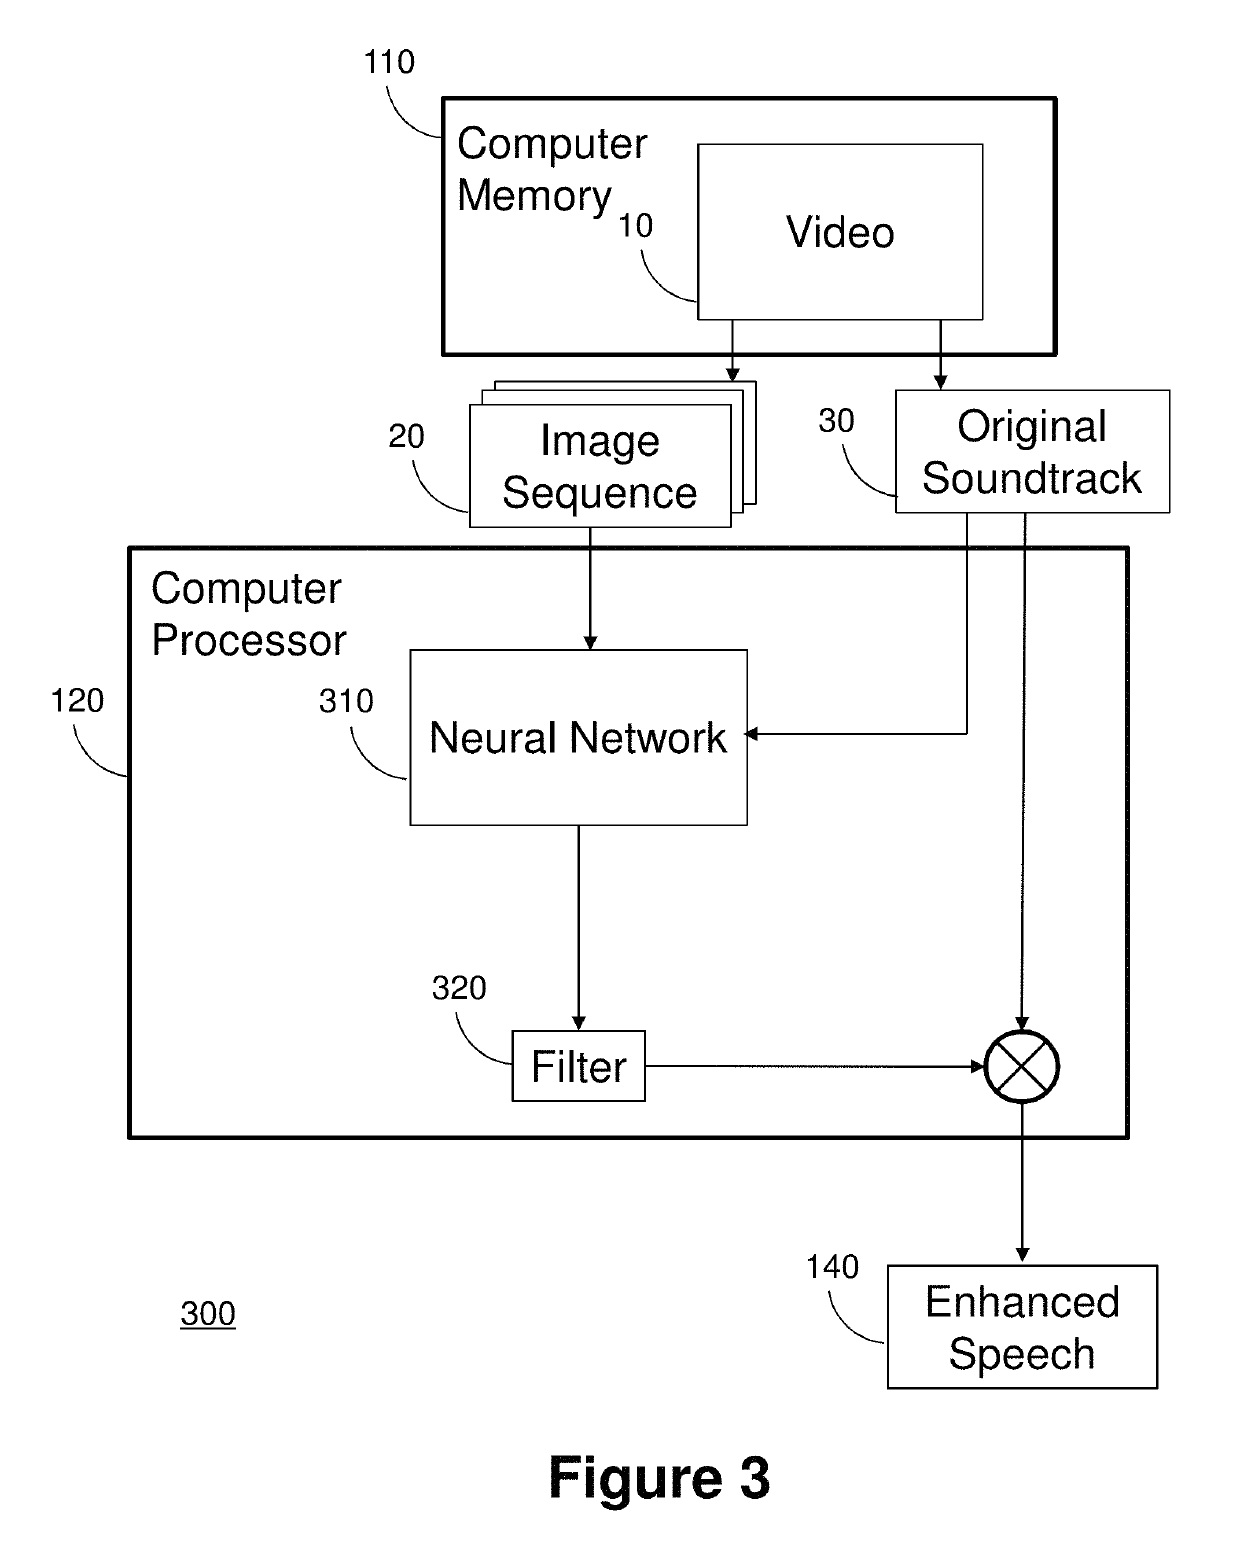 Method and system for enhancing a speech signal of a human speaker in a video using visual information